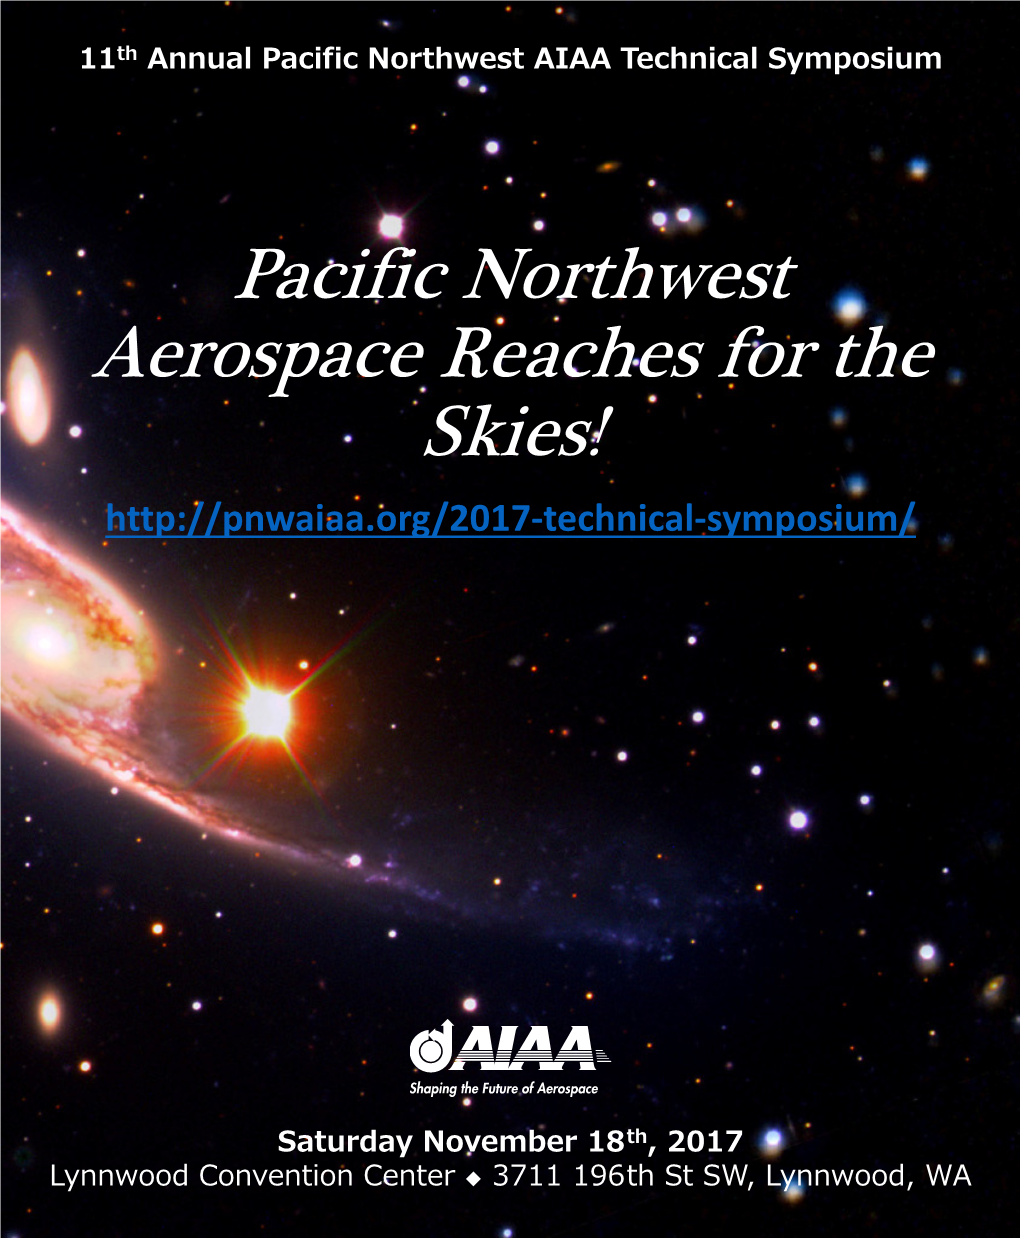 Pacific Northwest Aerospace Reaches for the Skies!